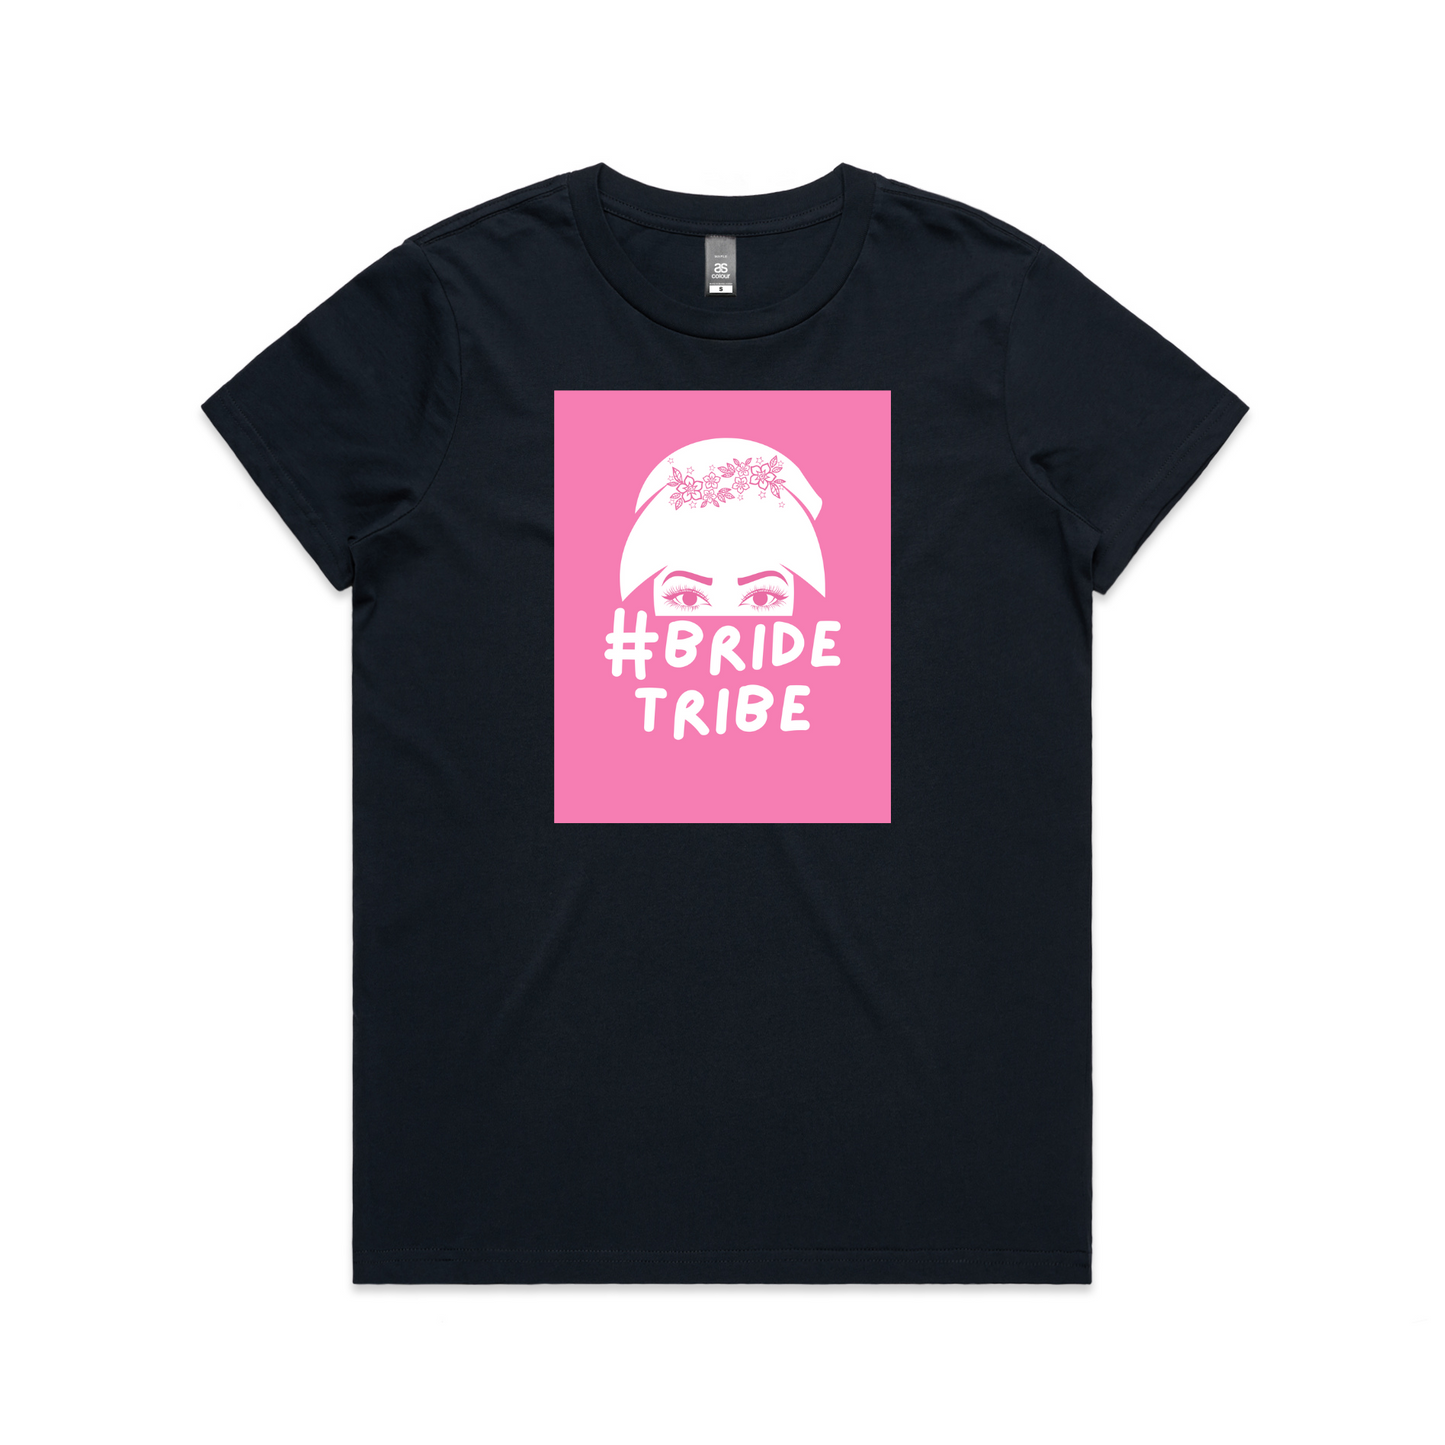 The Eyes Have It - Bride Tribe Tshirt